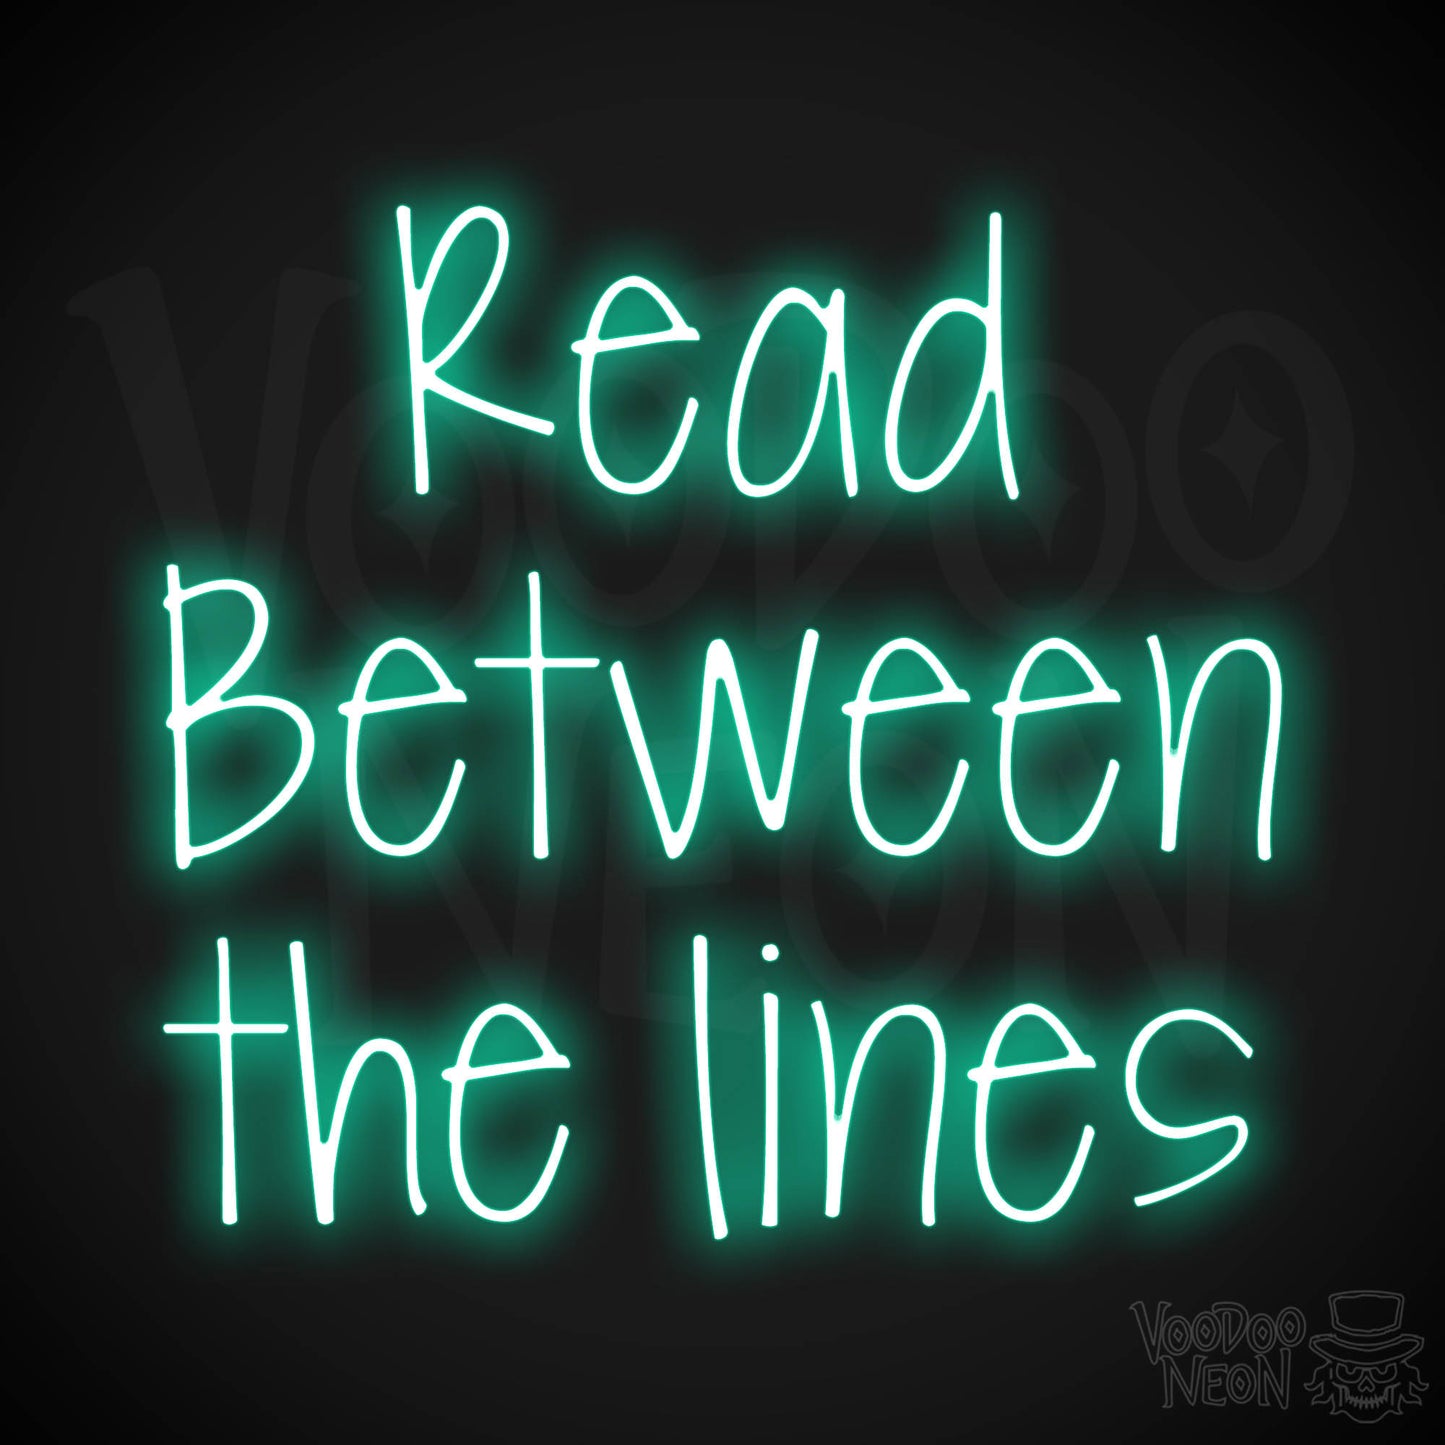 Read Between The Lines LED Neon - Light Green